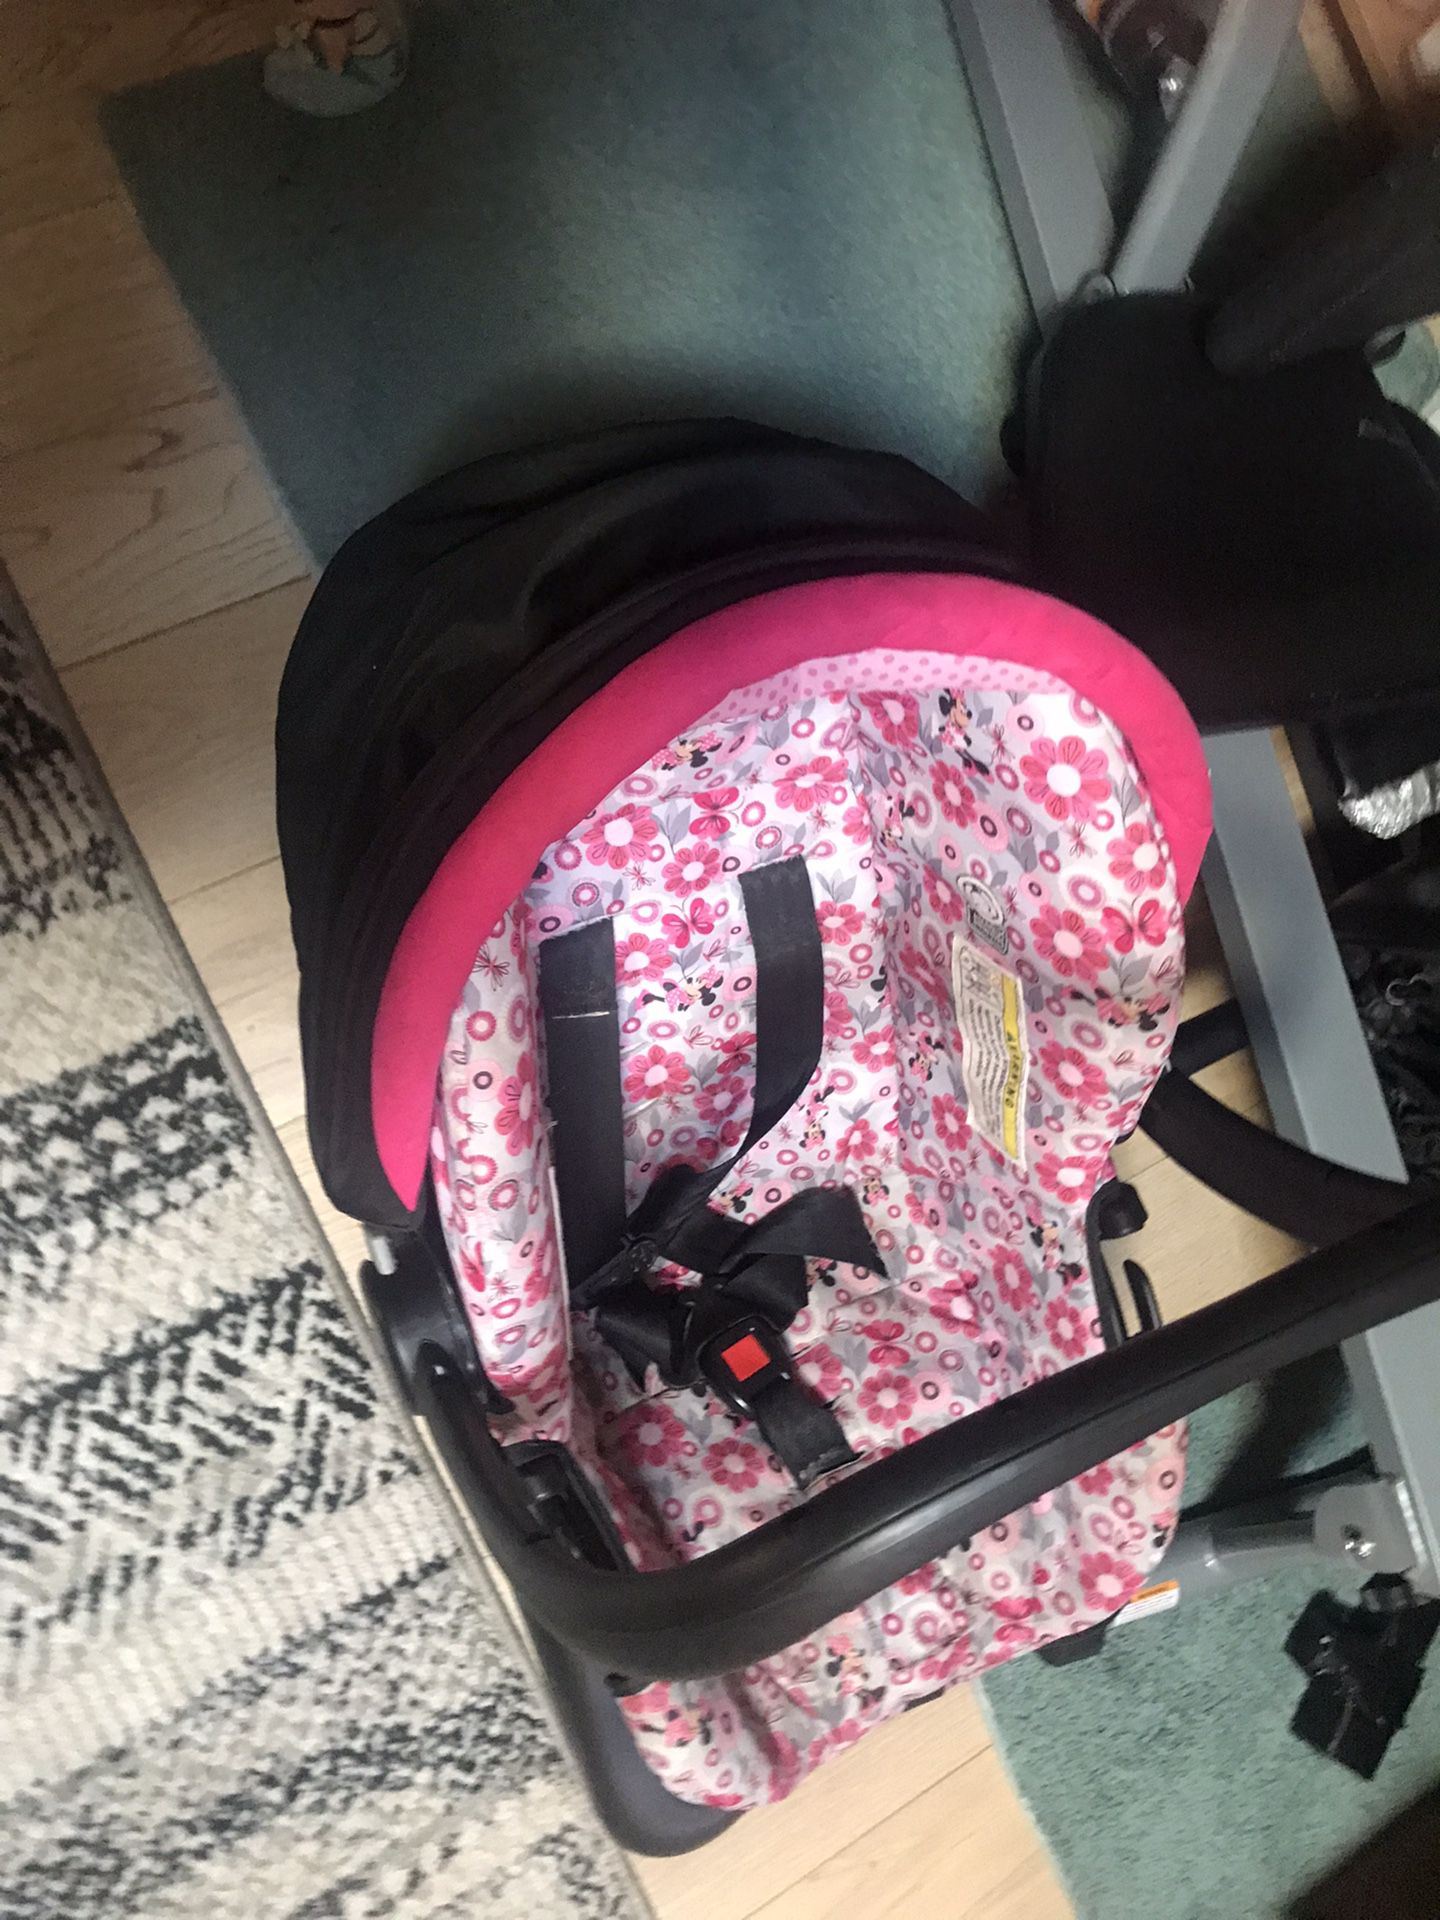 Minnie Girl Car Seat 30 Or Best Offer